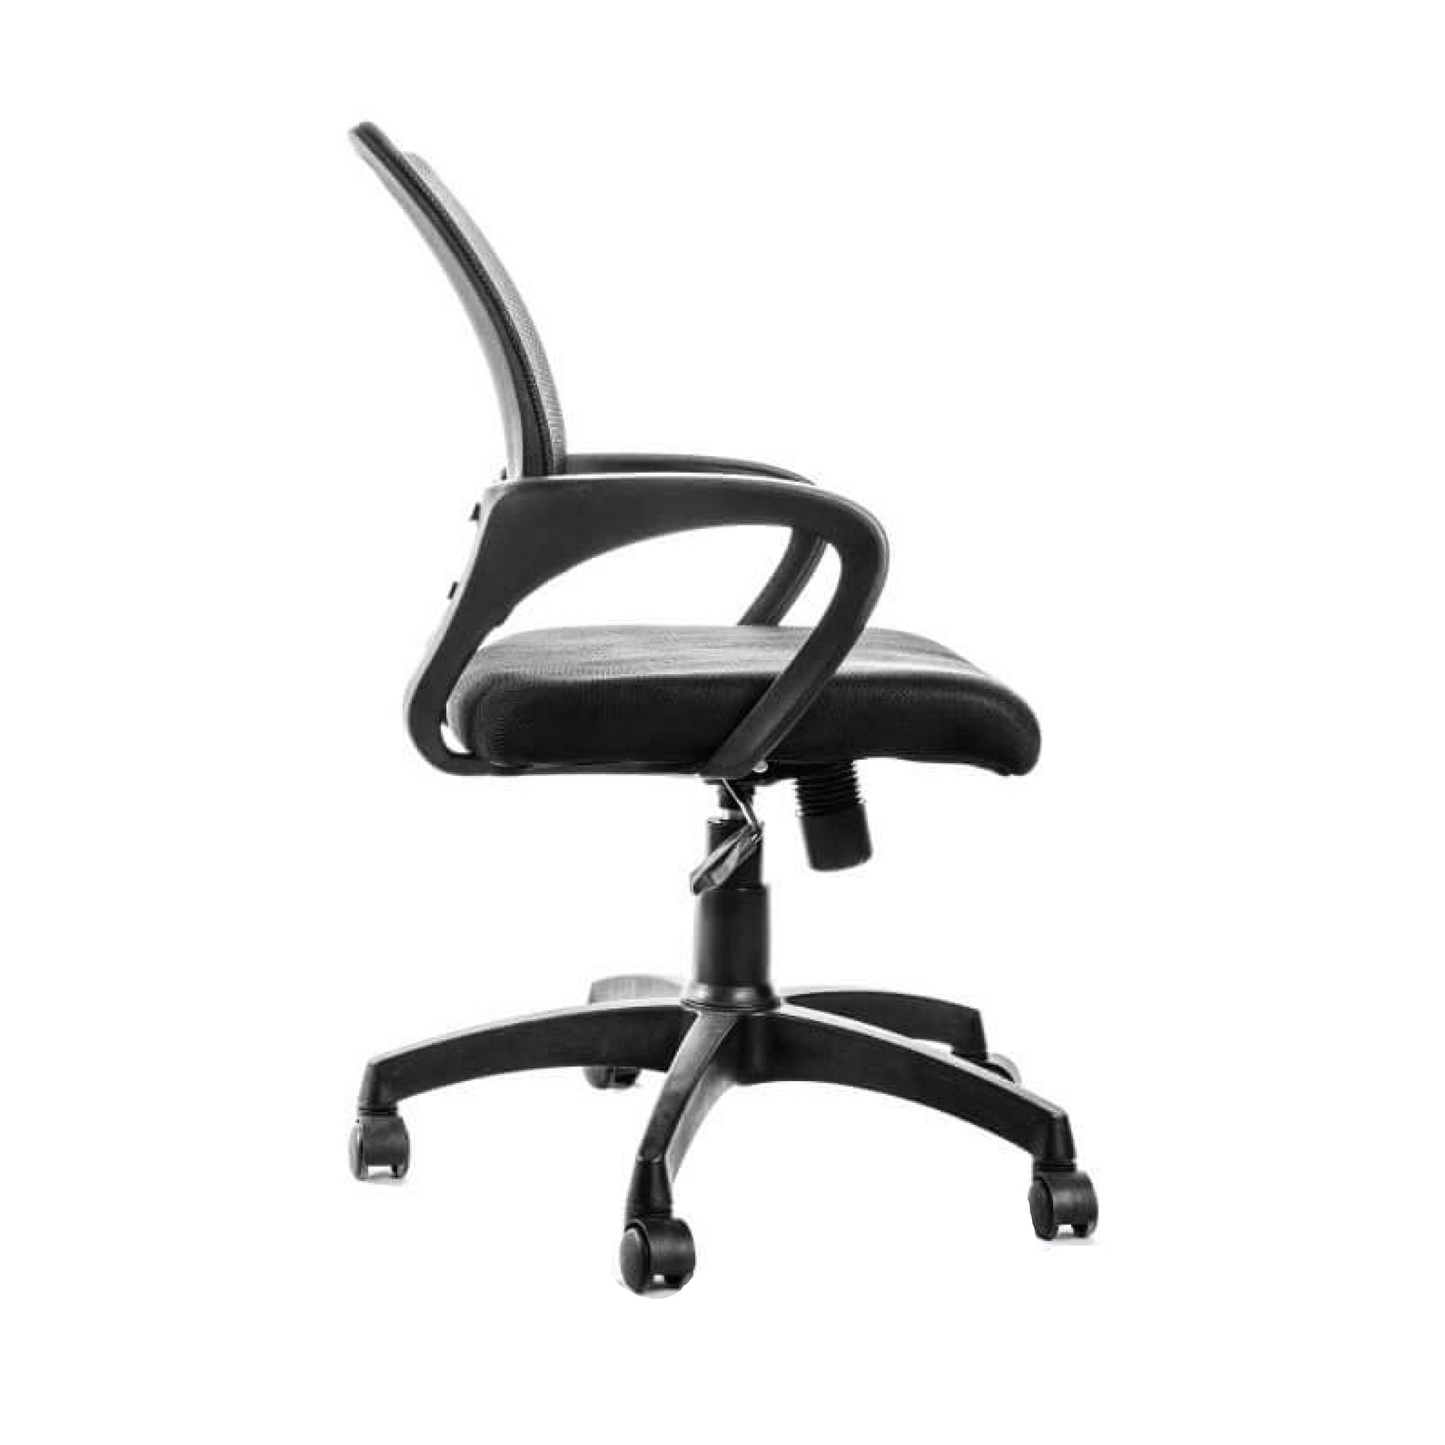 Best Office Chair - Model No. KP-VIper ECO